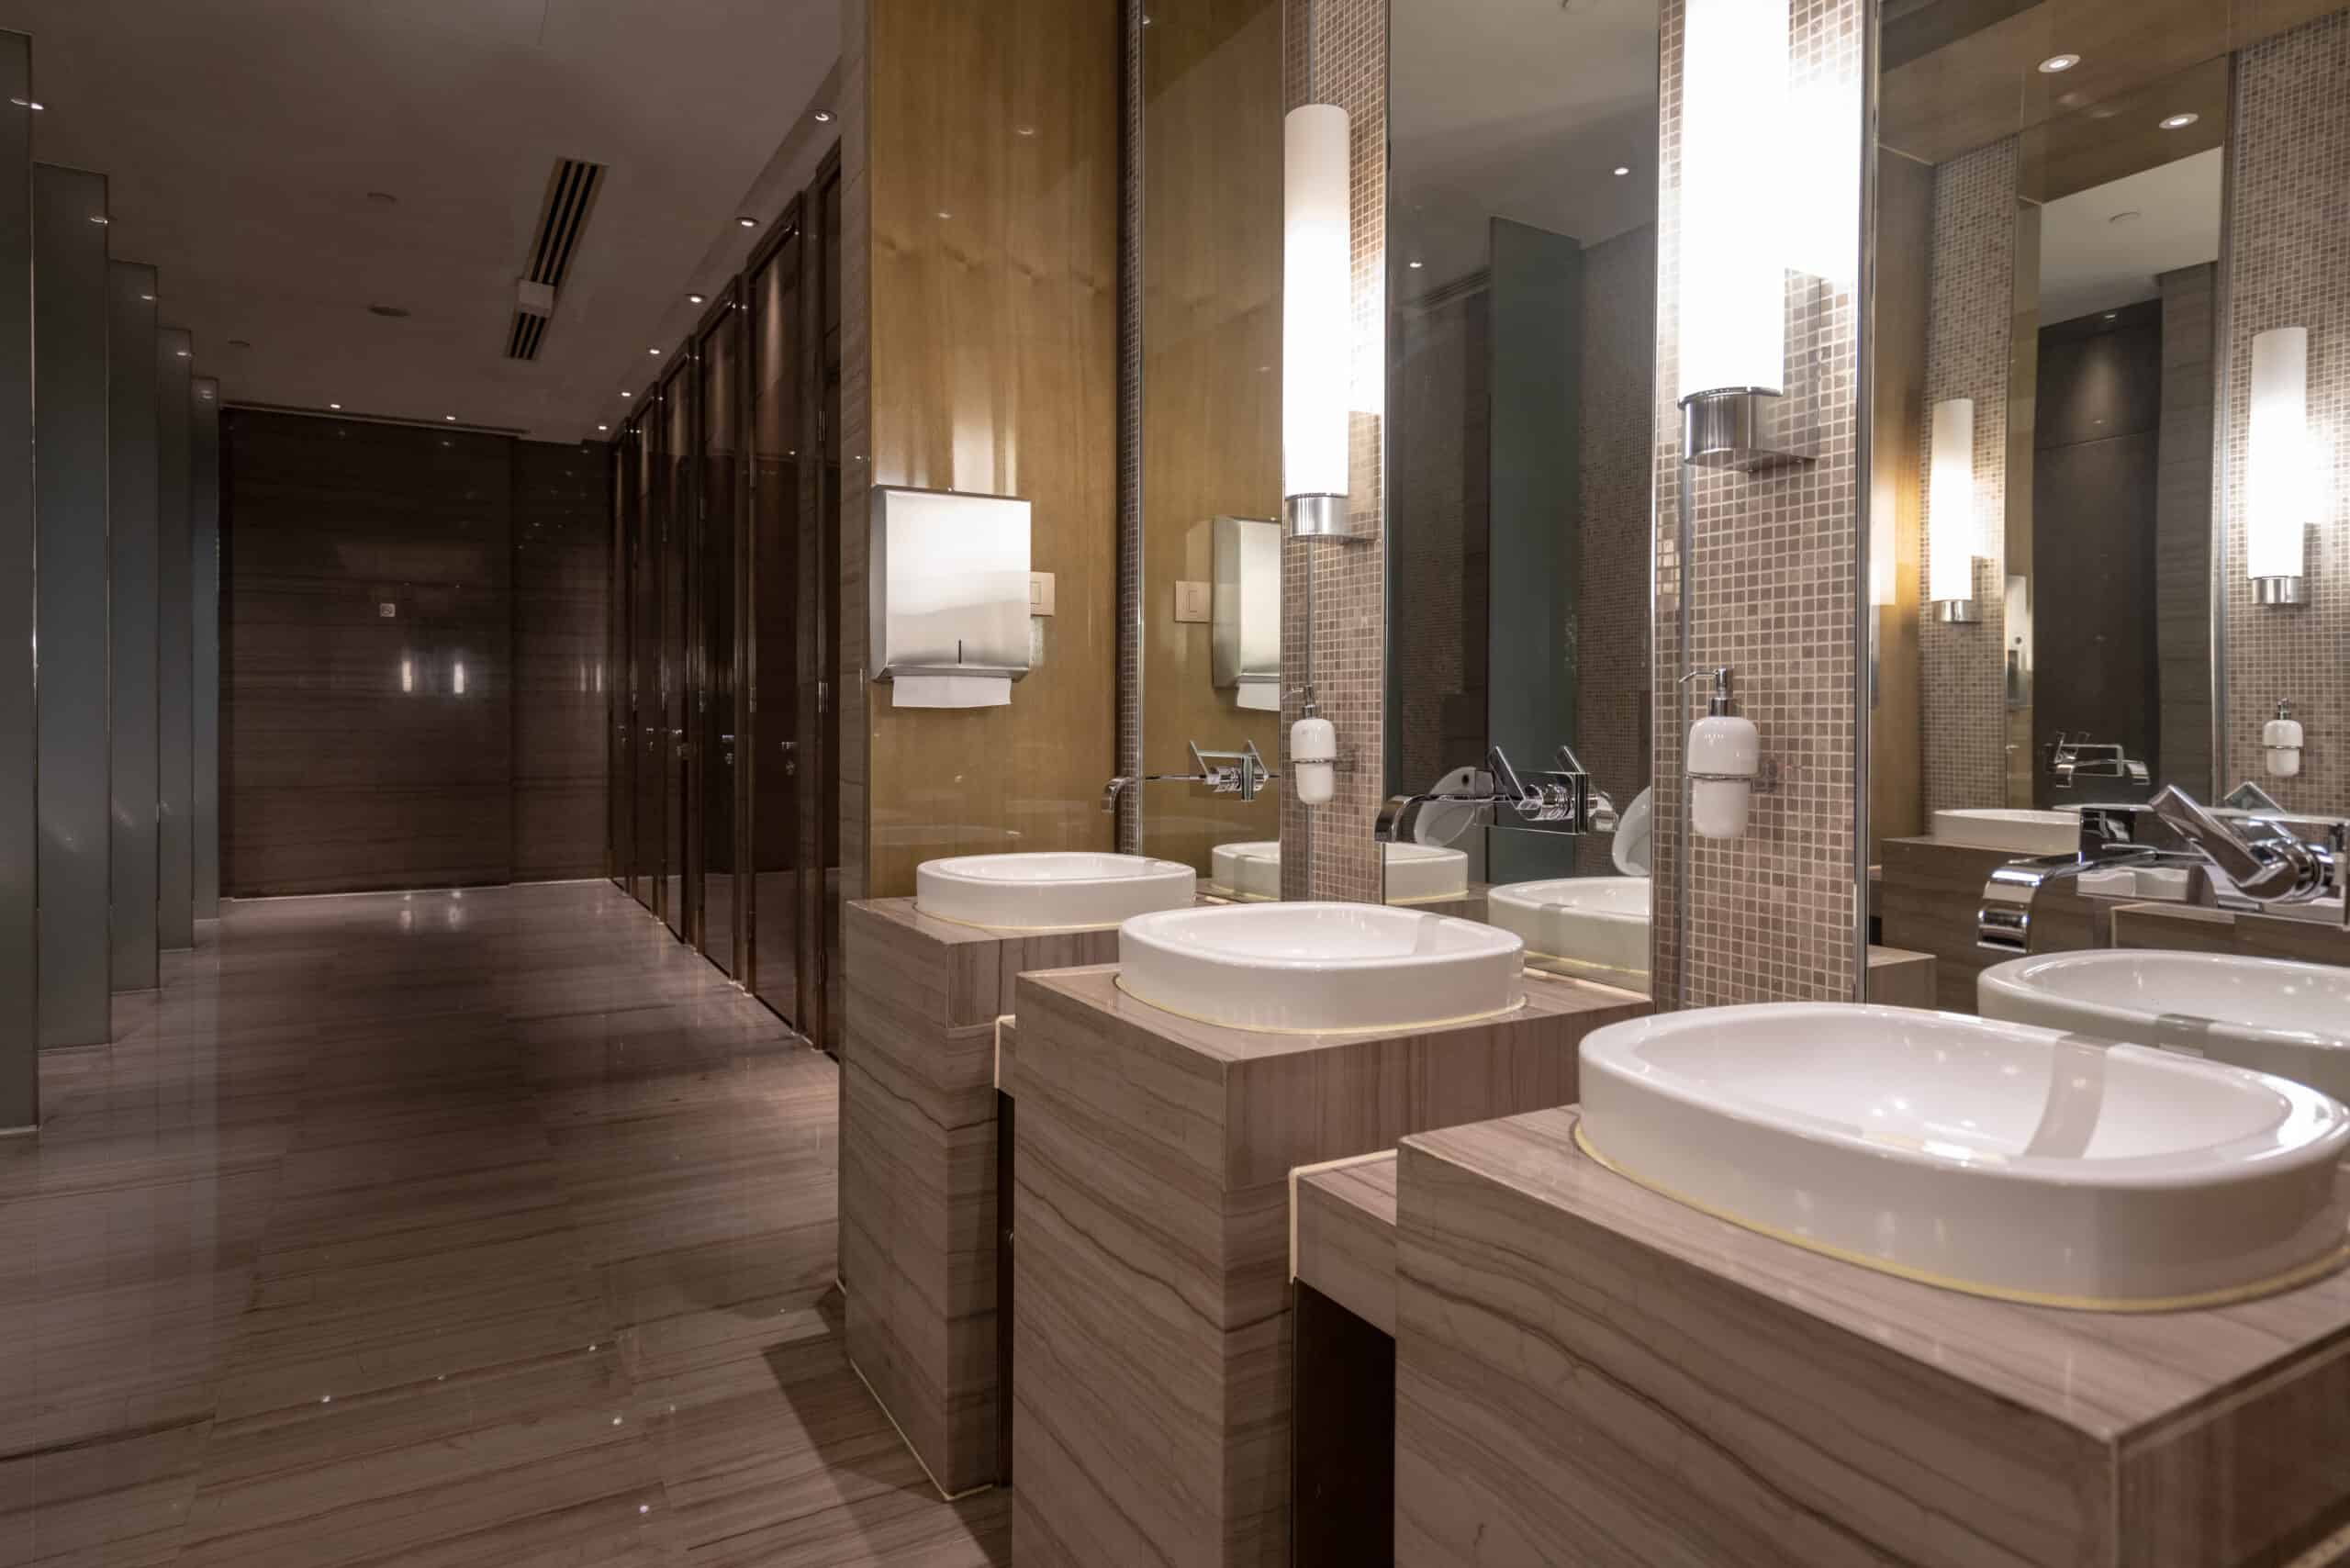 interior of clean bathroom with workplace washroom service